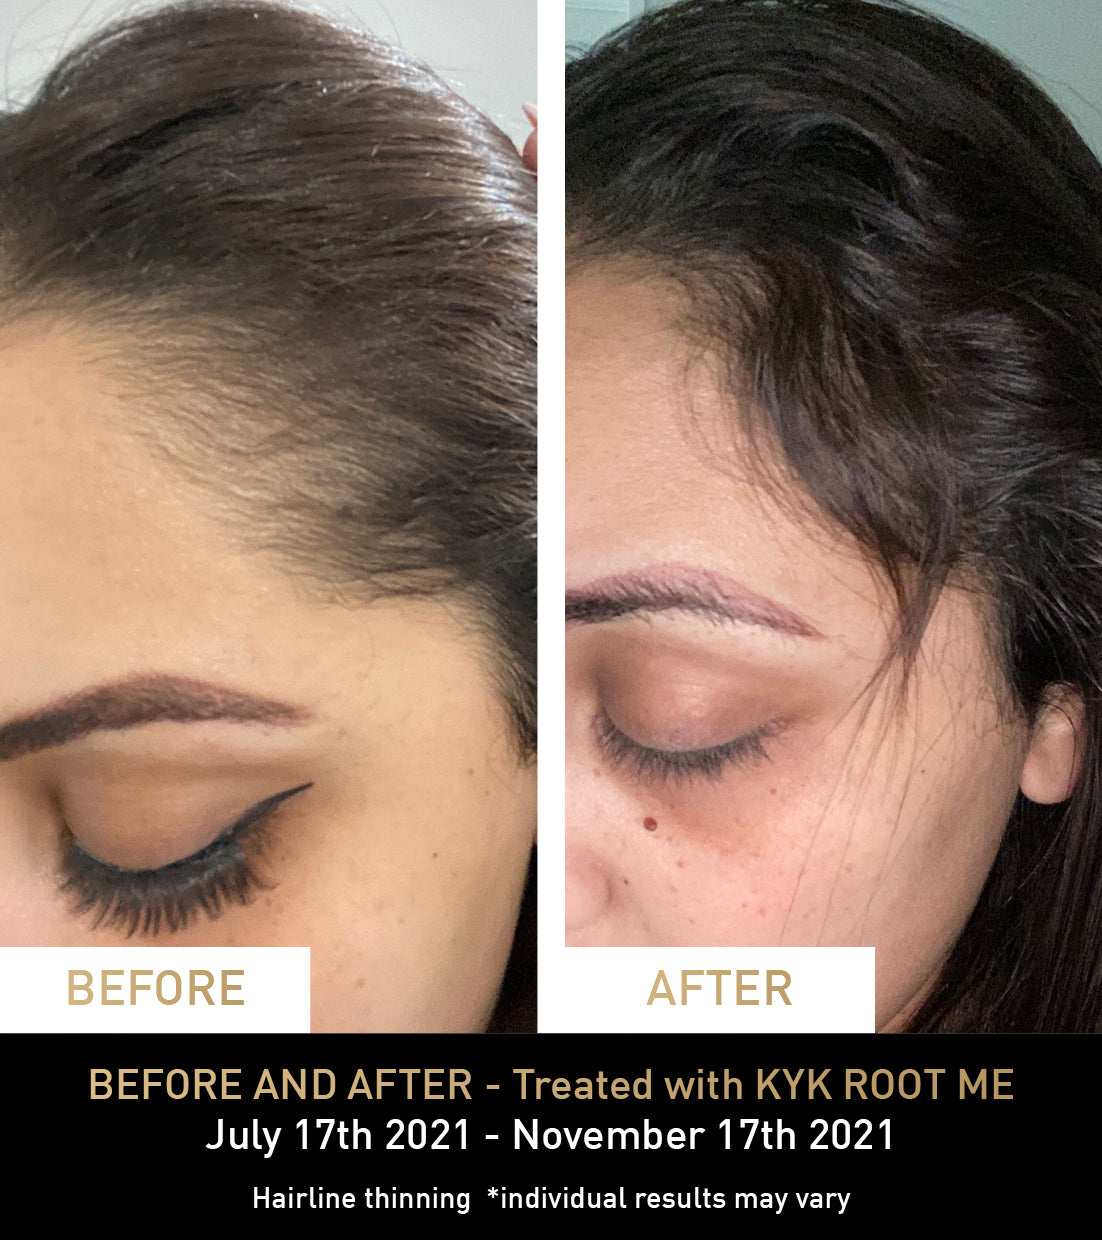 BEFORE AND AFTER - Treated with KYK ROOT ME